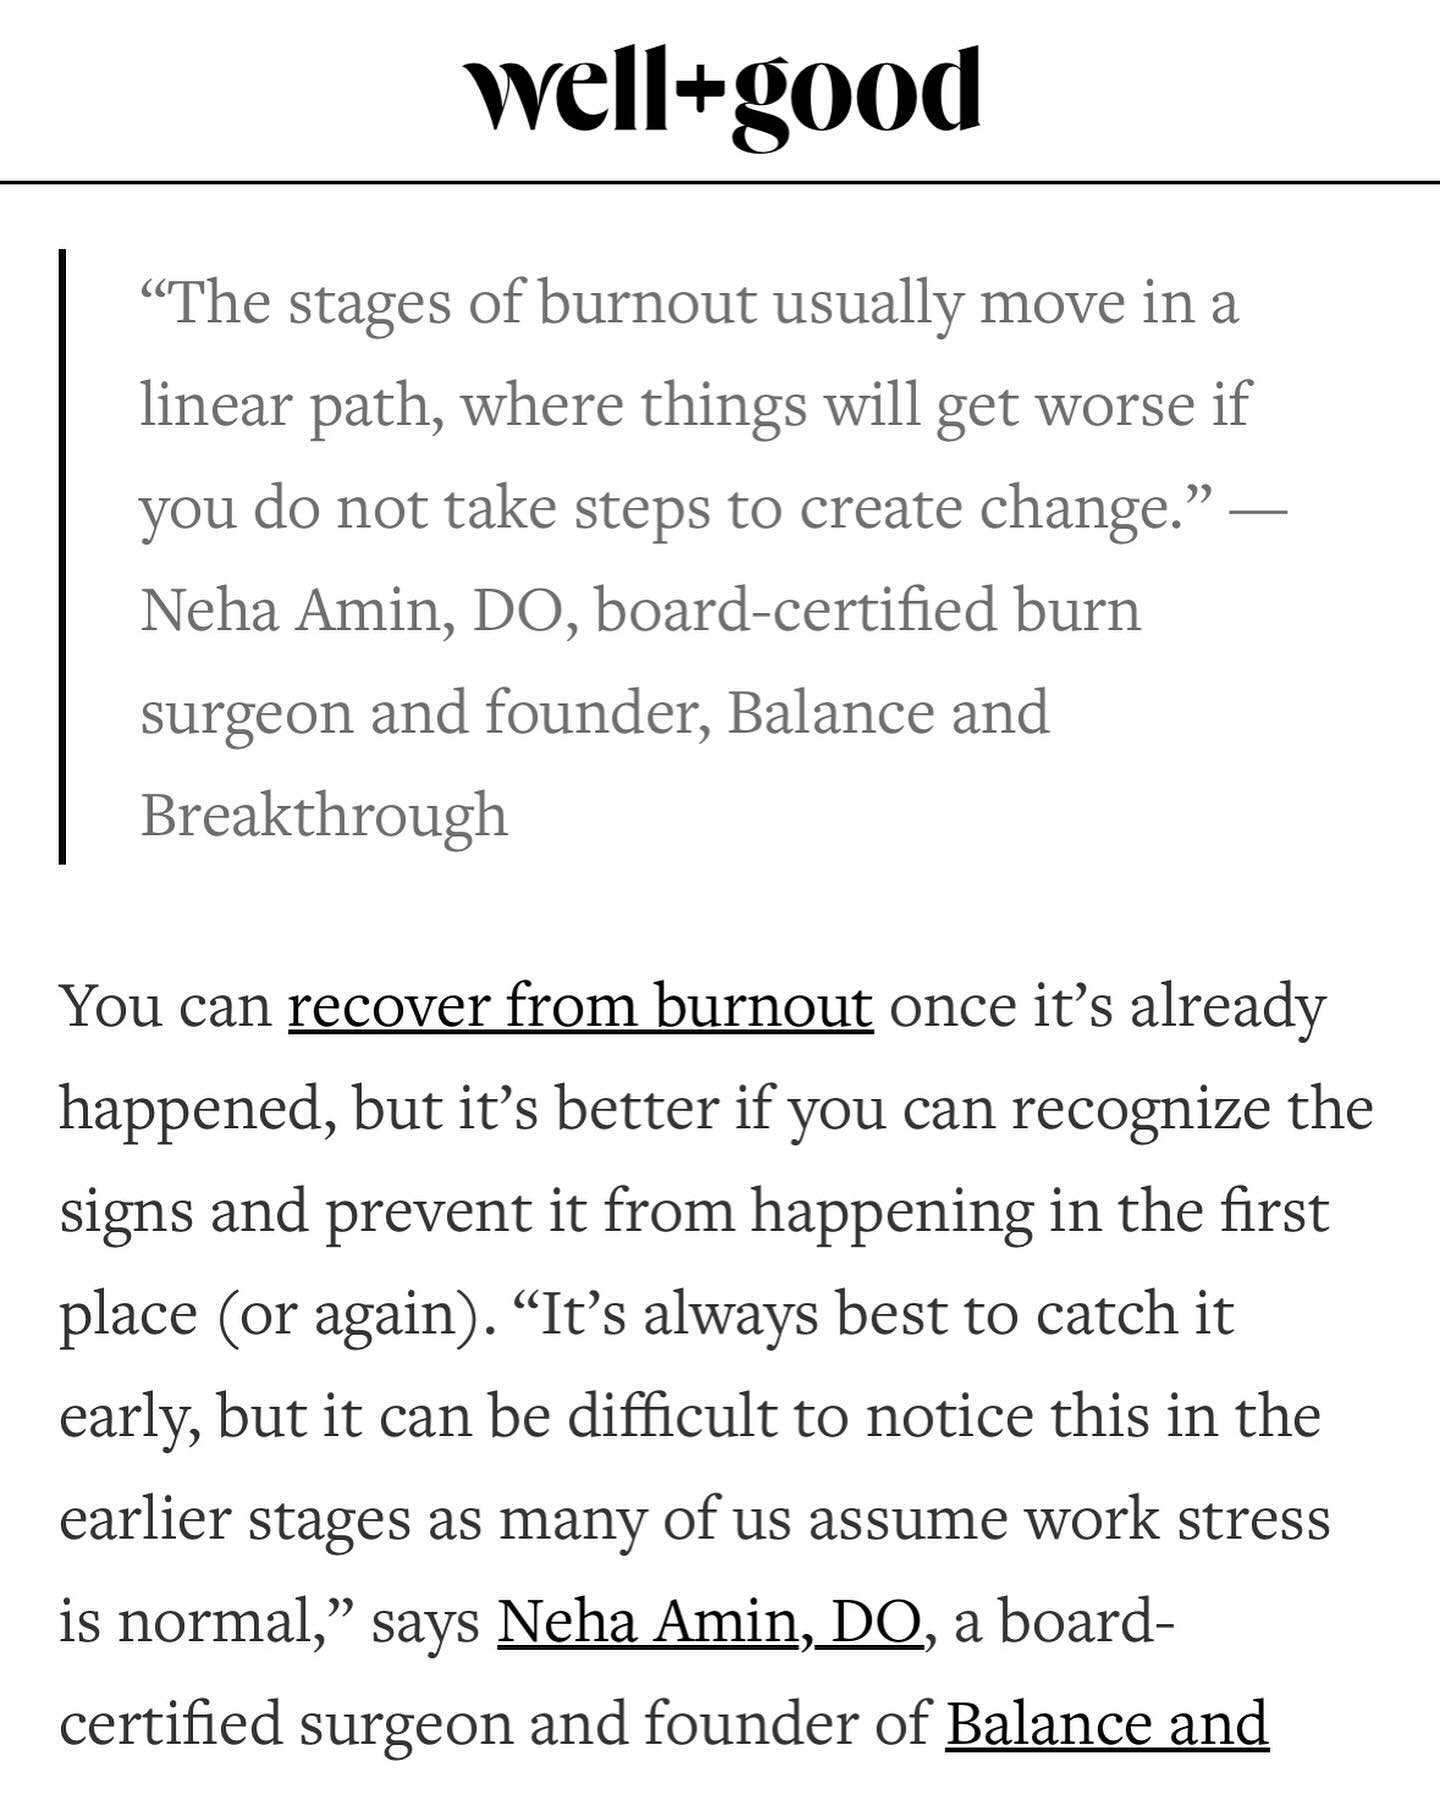 Honored to be included in this article with @iamwellandgood where we discuss the 5 stages of burnout. If they seem too familiar to you, it&rsquo;s time to start making some changes. Read the piece and let me know your thoughts! 
.
https://www.welland